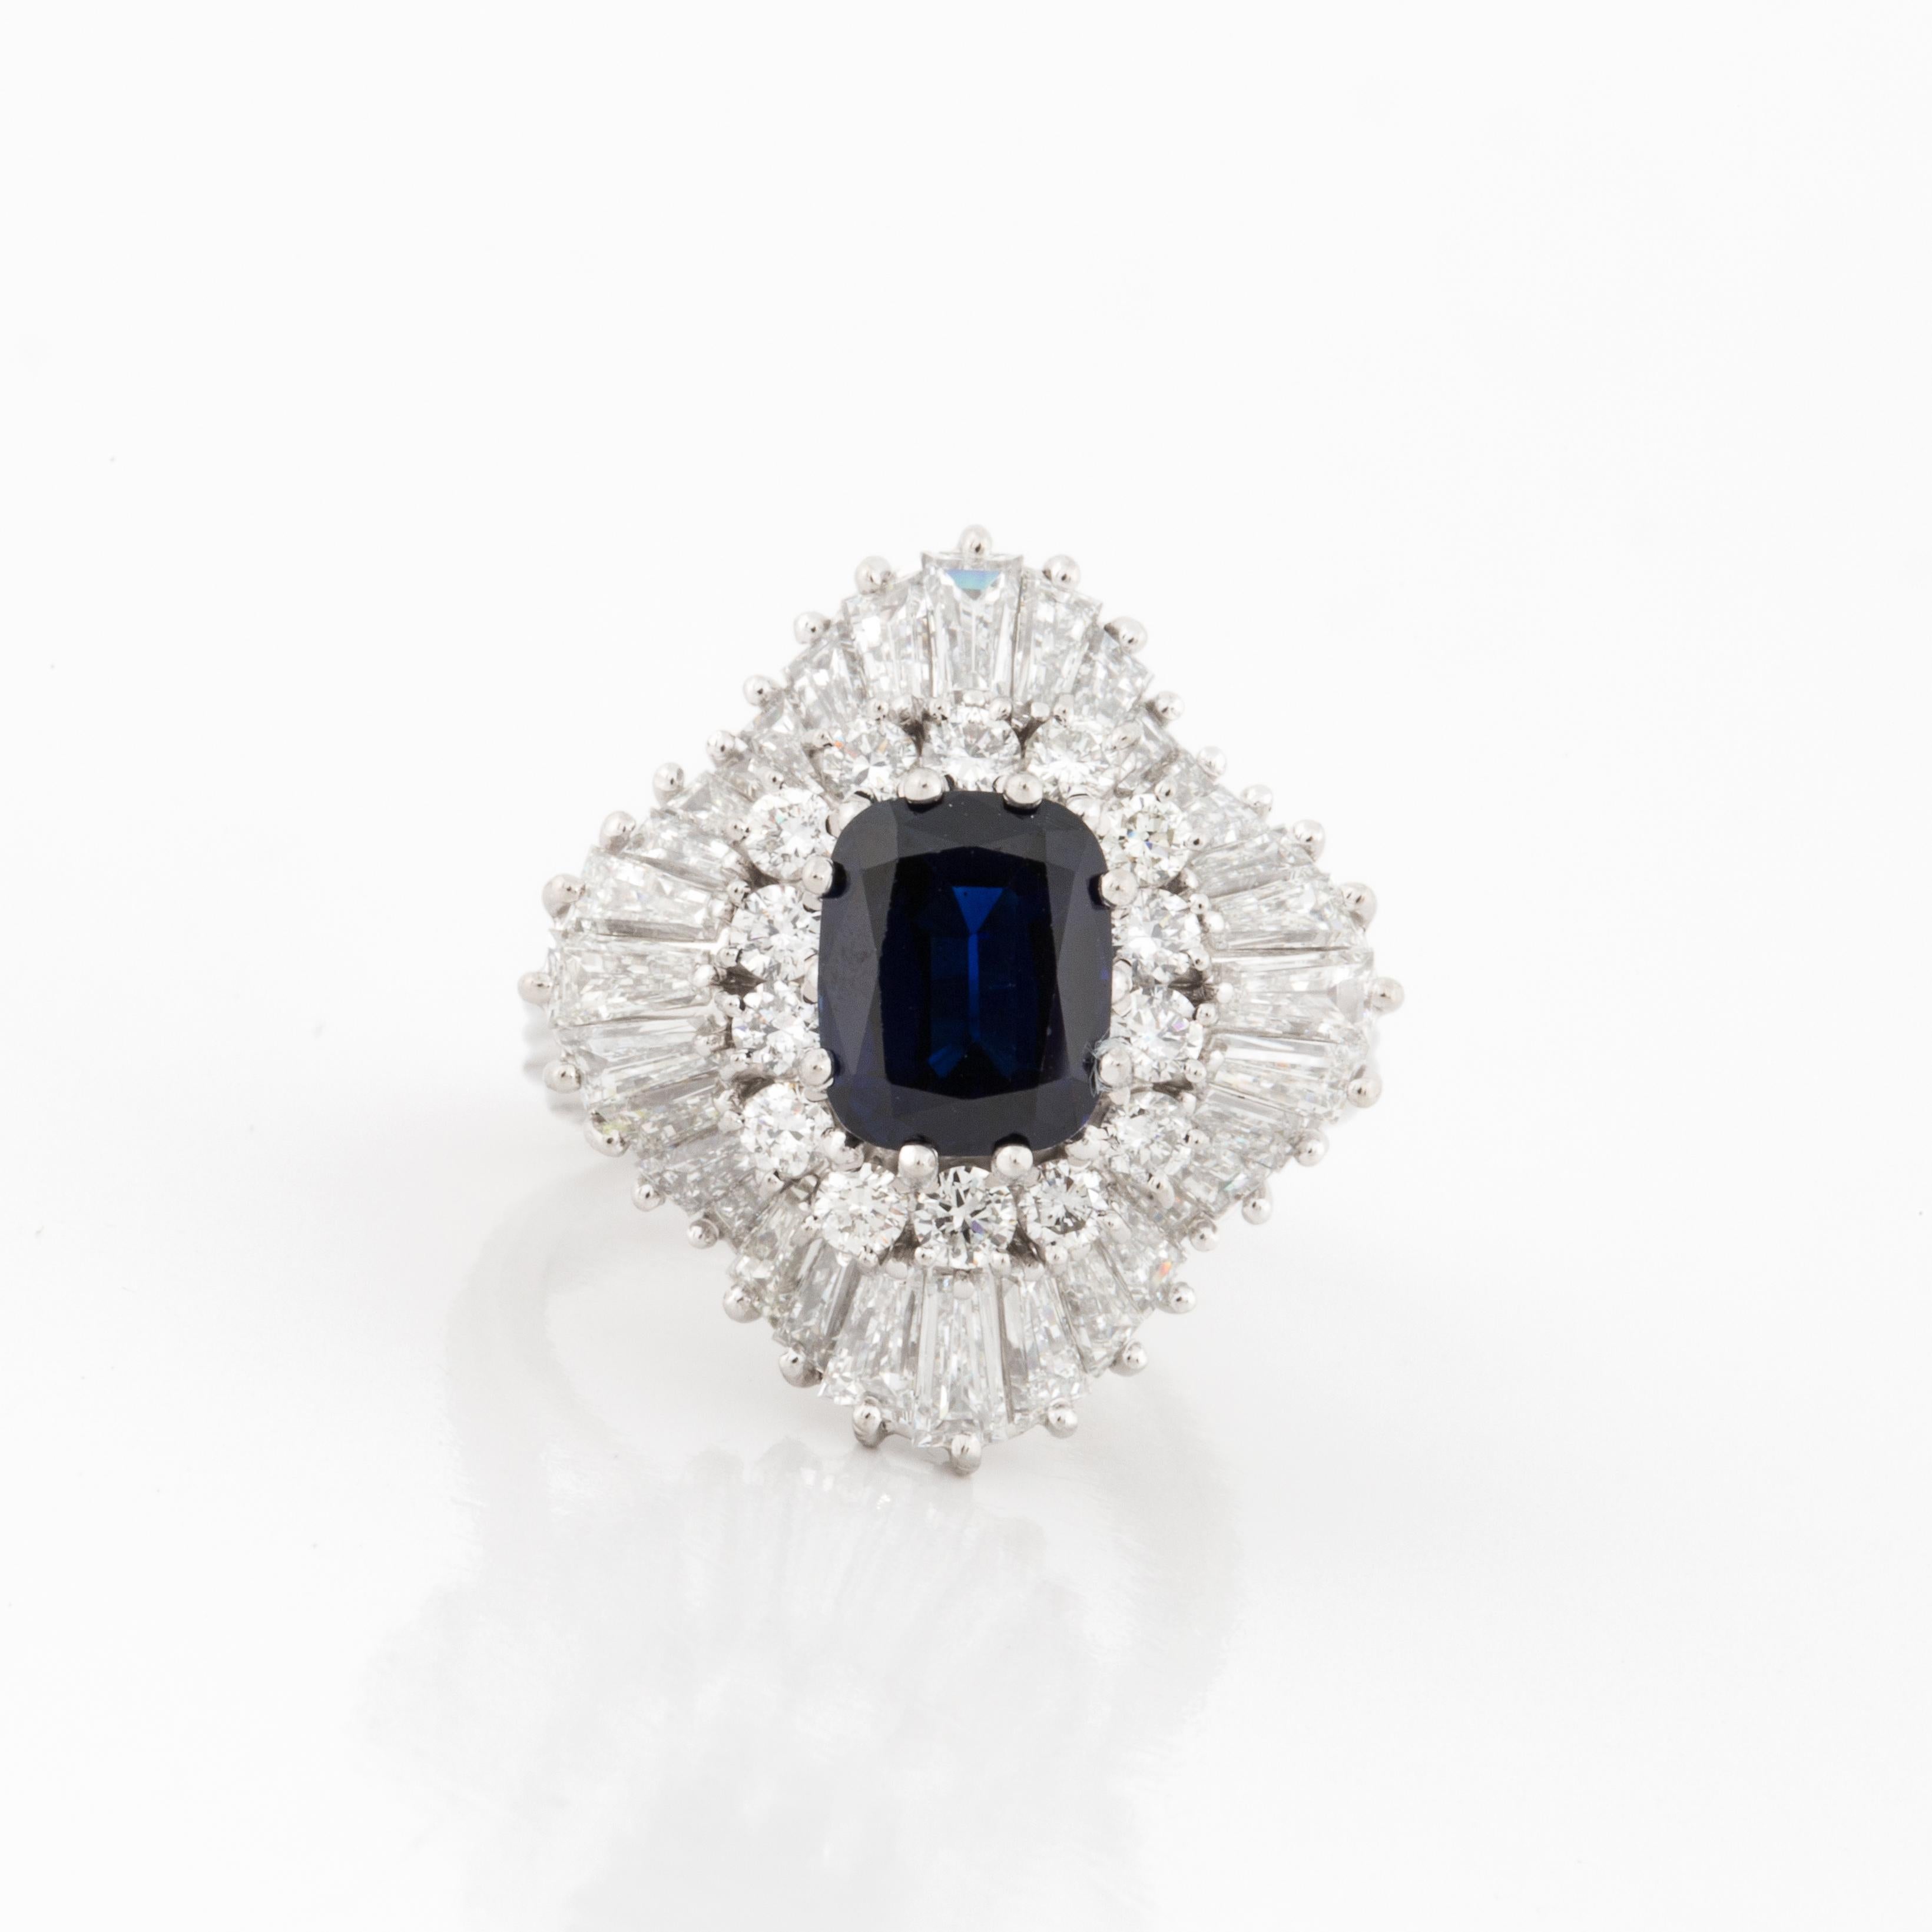 Ballerina style ring composed of platinum featuring a cushion-cut sapphire with round and baguette diamonds.  The sapphire totals 3.35 carats.  There are two rows of diamonds that frame the sapphire, 14 round diamonds that total 0.70 carats and 32